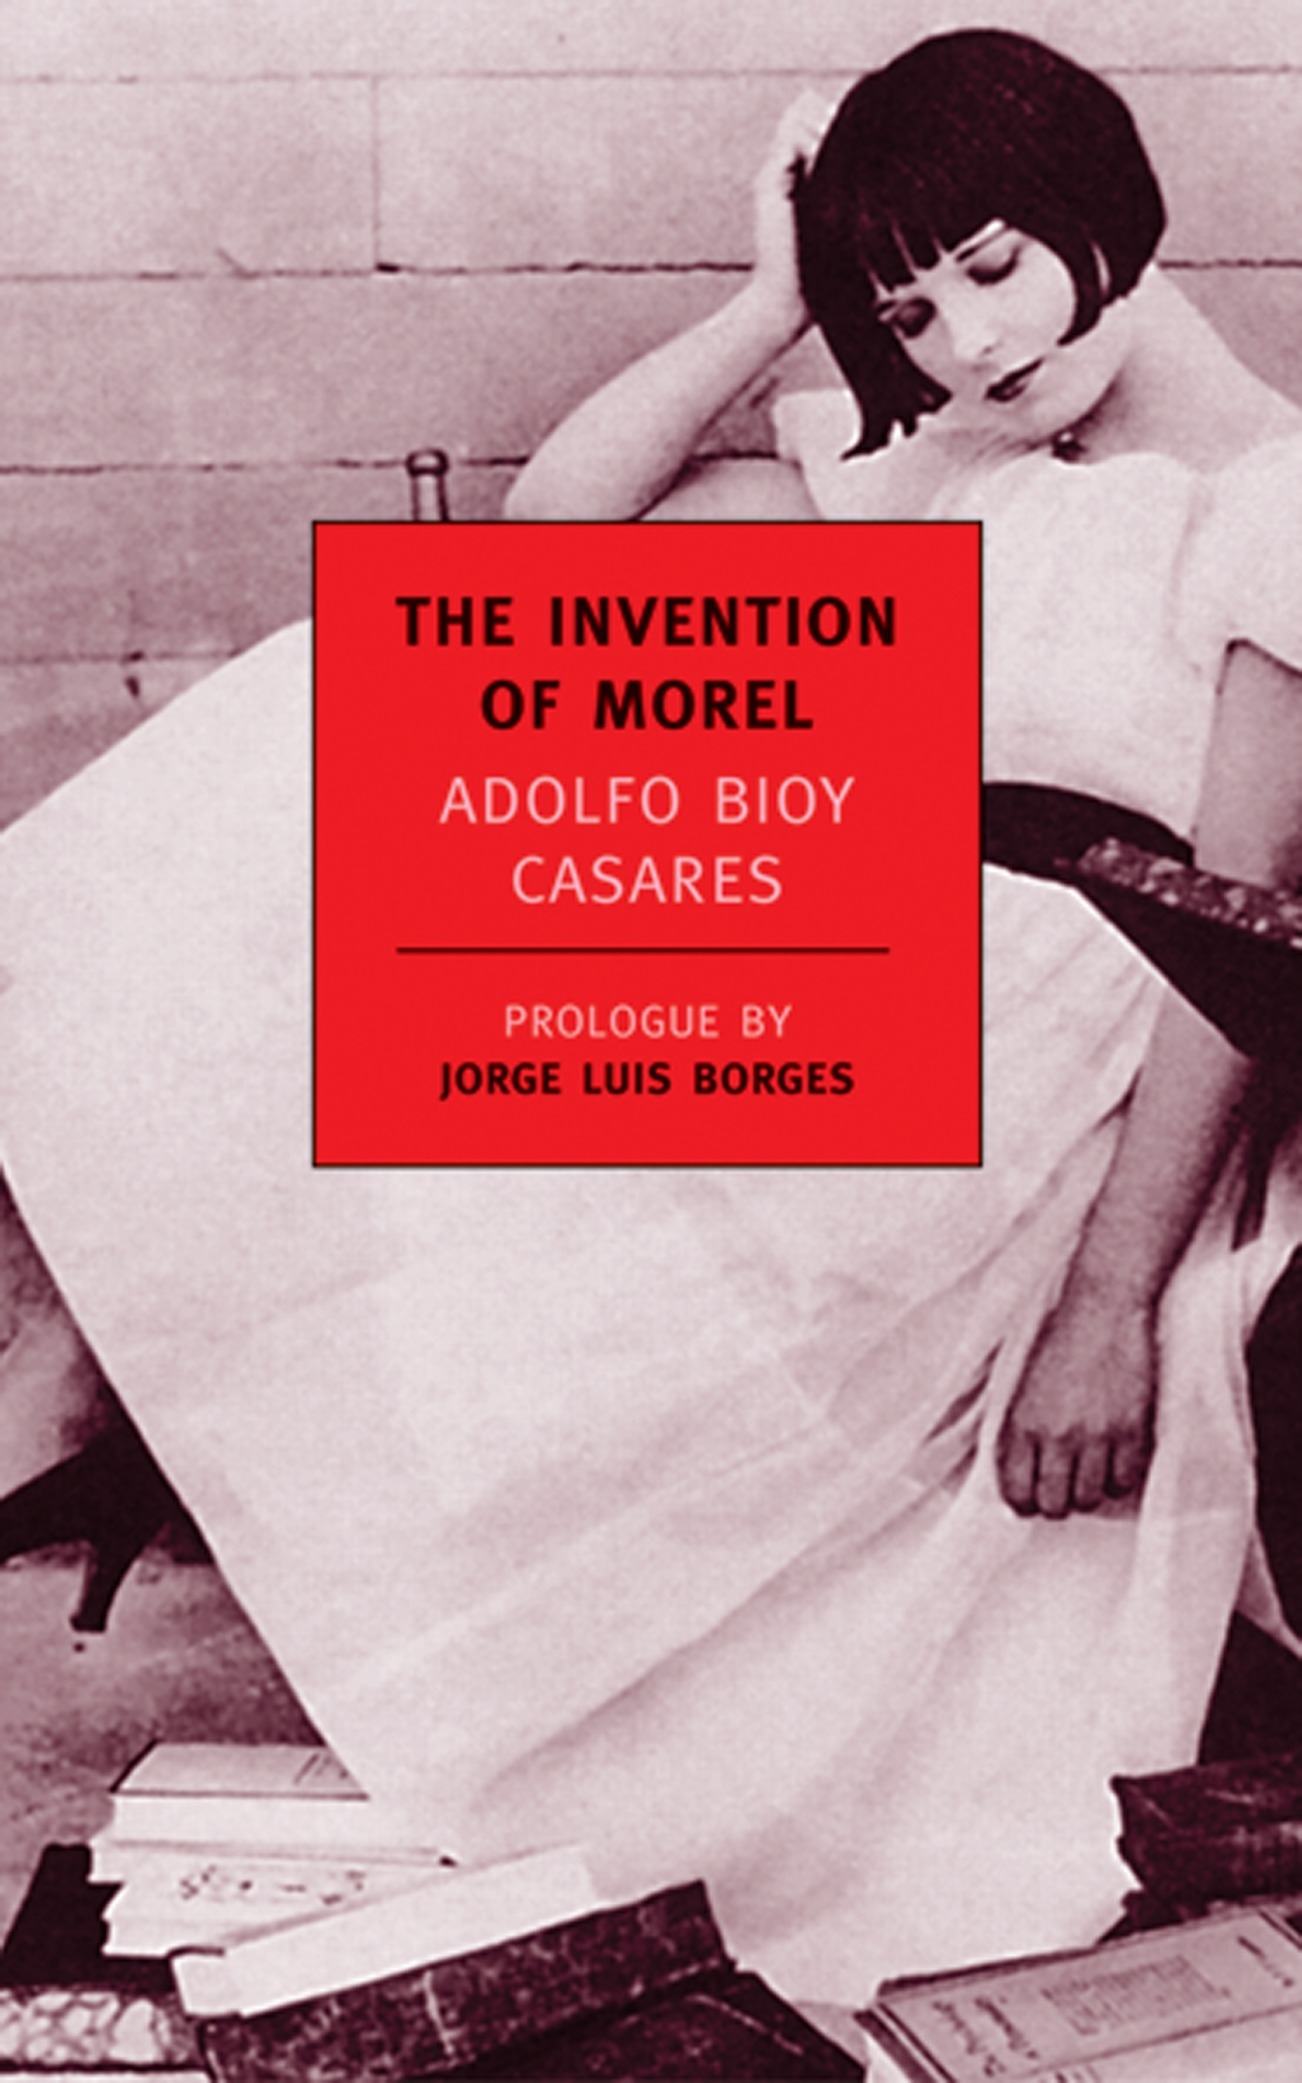 The Invention Of Morel by Adolfo Bioy Casares  Penguin Books Australia